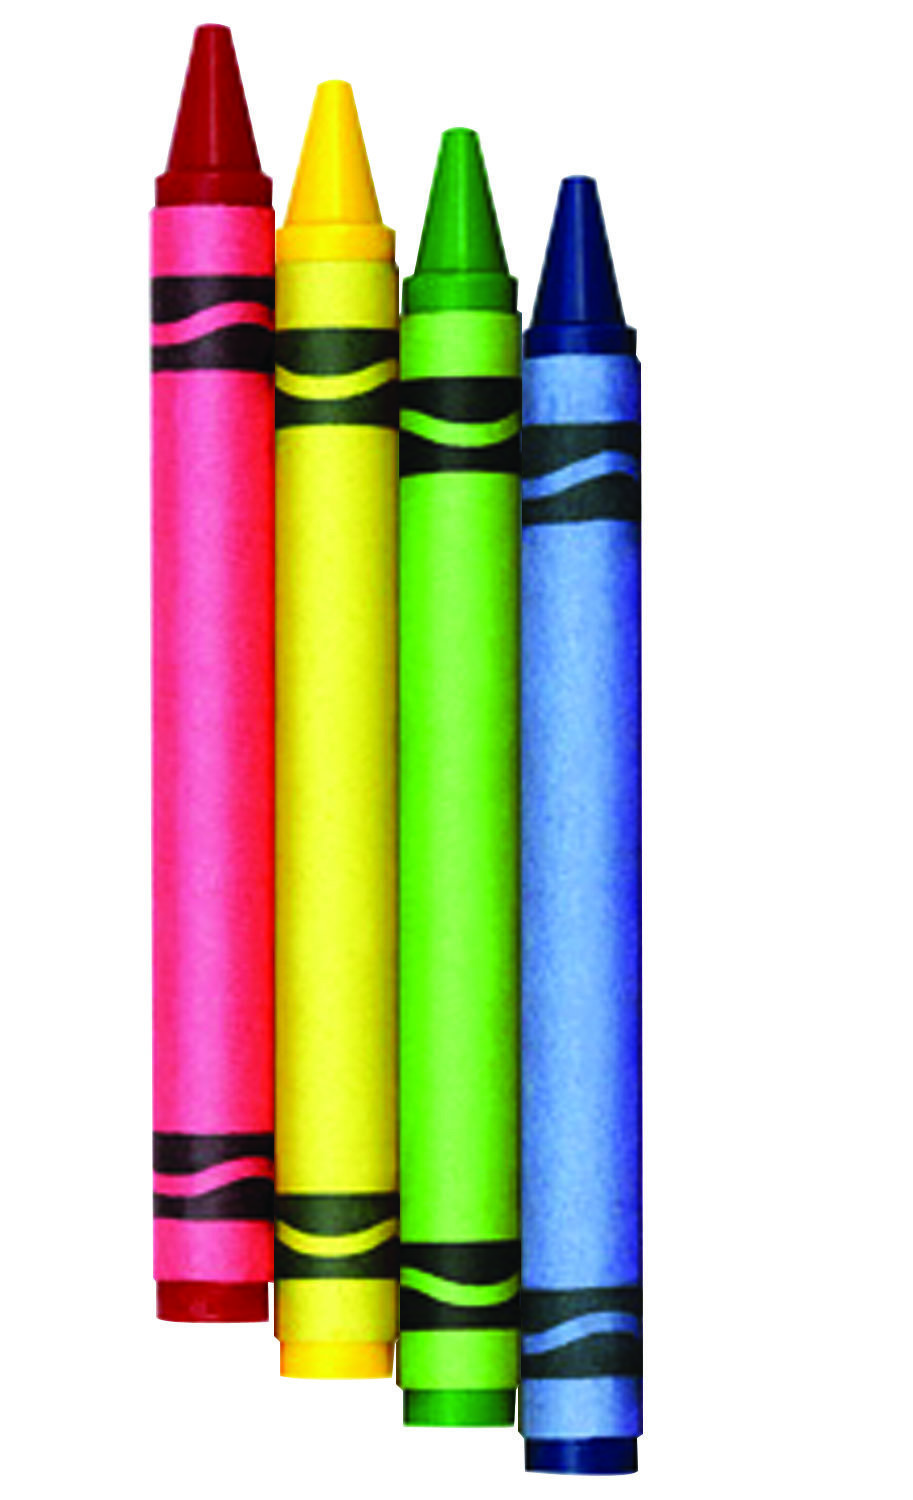 Crayons (4 pack) - Store - Pupil Transportation Safety Institute